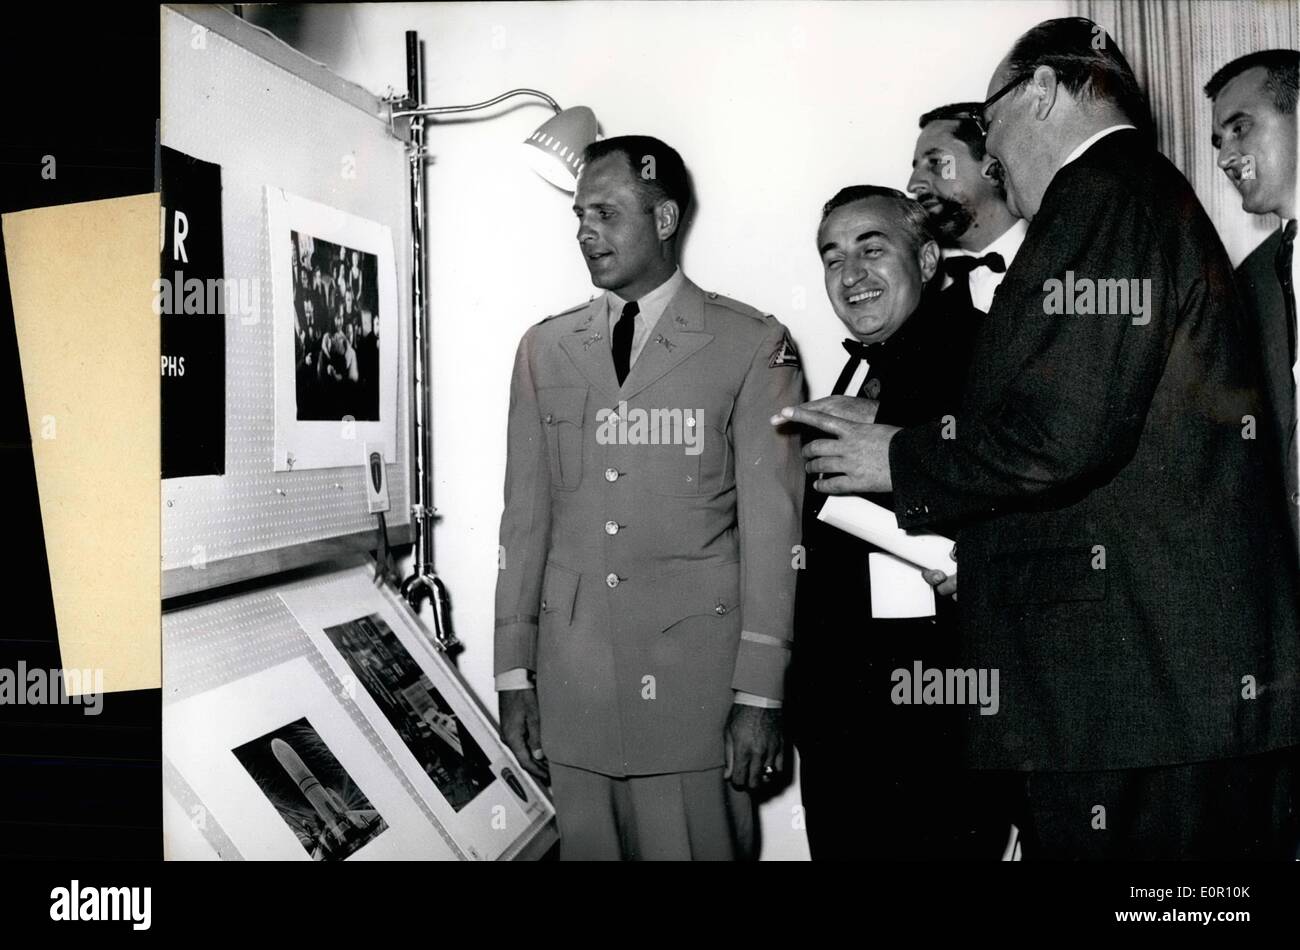 Aug. 08, 1957 - Enthusiastic photo-amateurs of the US Army: have exhibition their pictures on August 24th and 25th 1957 in Berchtesgaden, where they will be awarded a prize by an expert jury. Photo Shows Left to right: 1st Lieutenant W. Gyetan (Frank W. Gyetan) (Co E, 11th, Armd Cav Regt Southern Area Command) who received the 1st prize for his black-and-white photograph ''Star and Satellites''. Members of the jury were Mr. Jacob Deschin, picture-editor of the New York Times; Director Fritz Gruber of the ''Photokina'' and Dr. Otto Croy, Chief-editor of the ''Photo-Magazine' Stock Photo